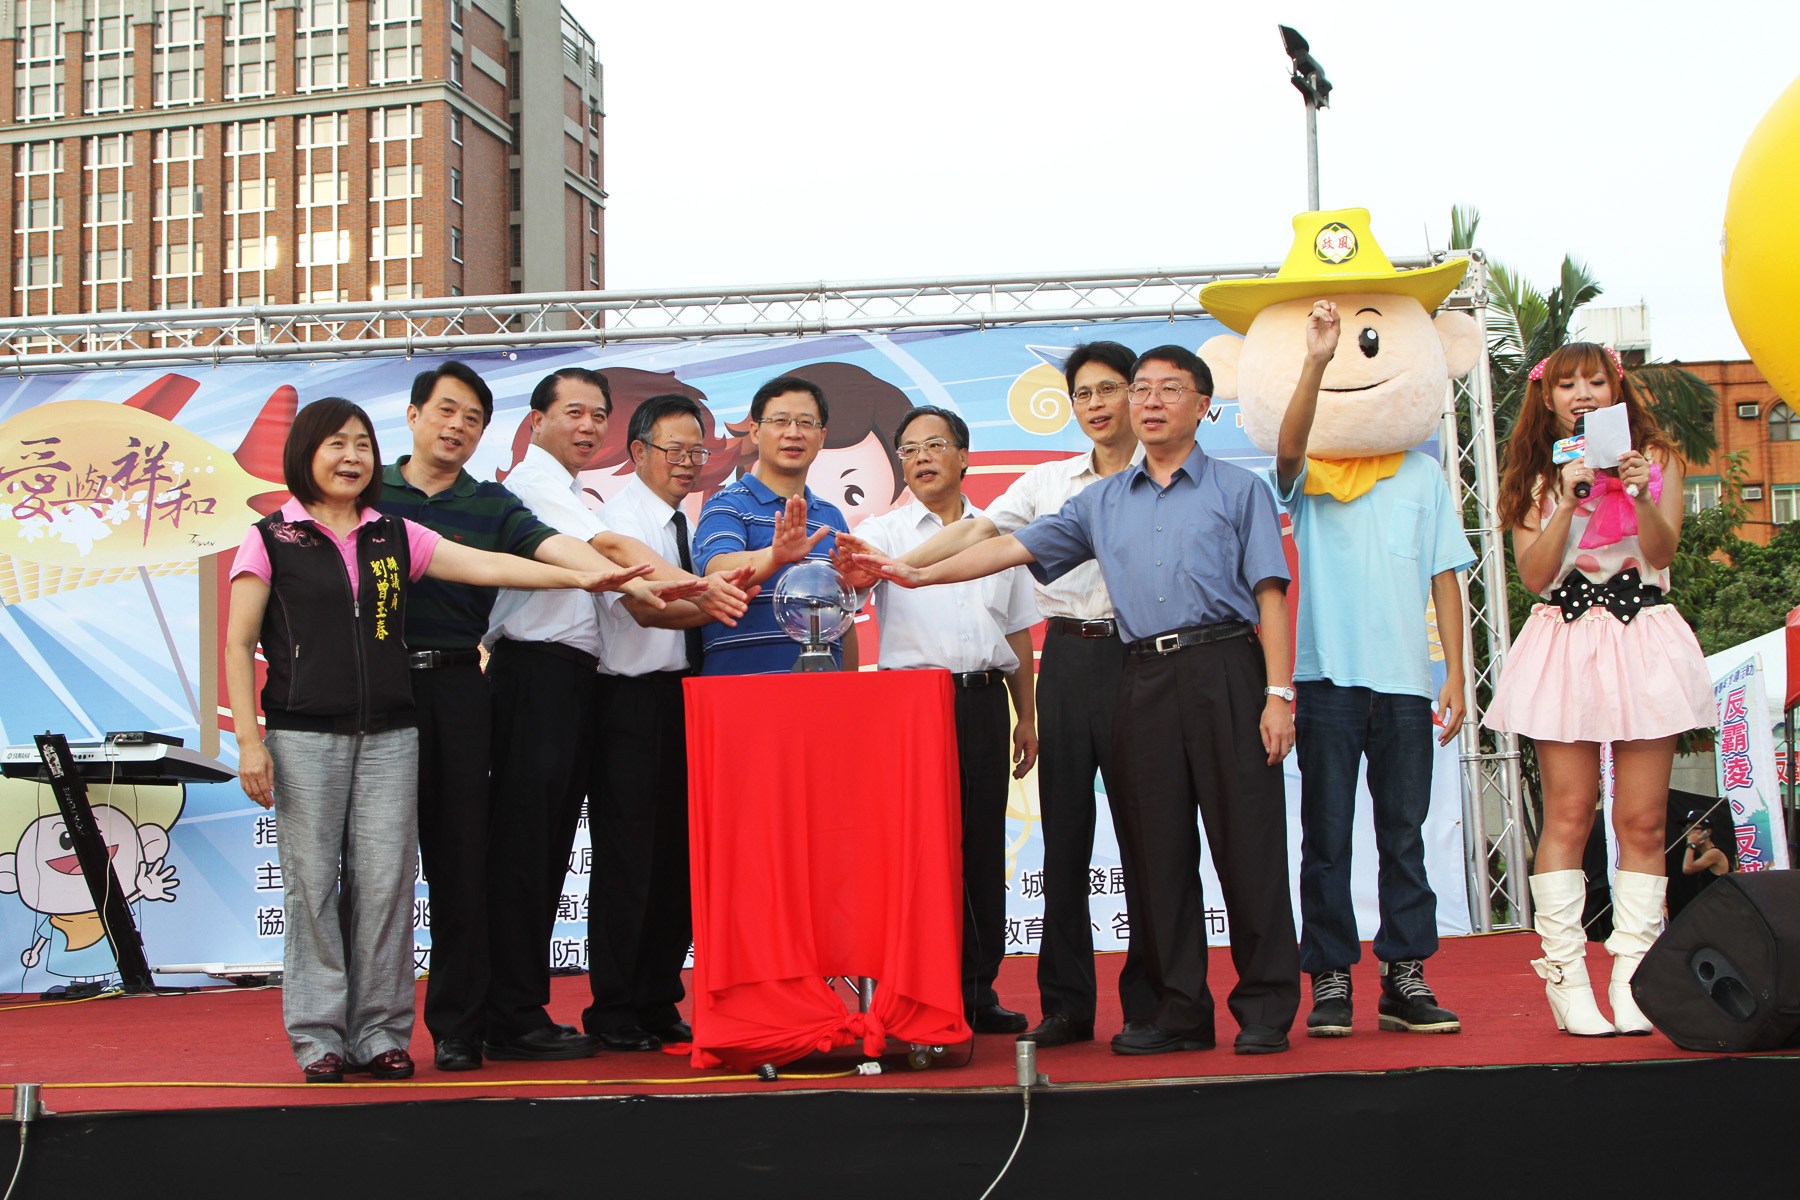 On August 13, 2011, Chou Chih-jung, Director General of the Agency Against Corruption, participated in Taoyuan County Government’s R.O.C Centenary Festival in Taoyuan. Director General Chou and Taoyuan County Mayor Wu Chih-yang, along with guests in attendance, pledged to build a clean government and a uncorrupt homeland.